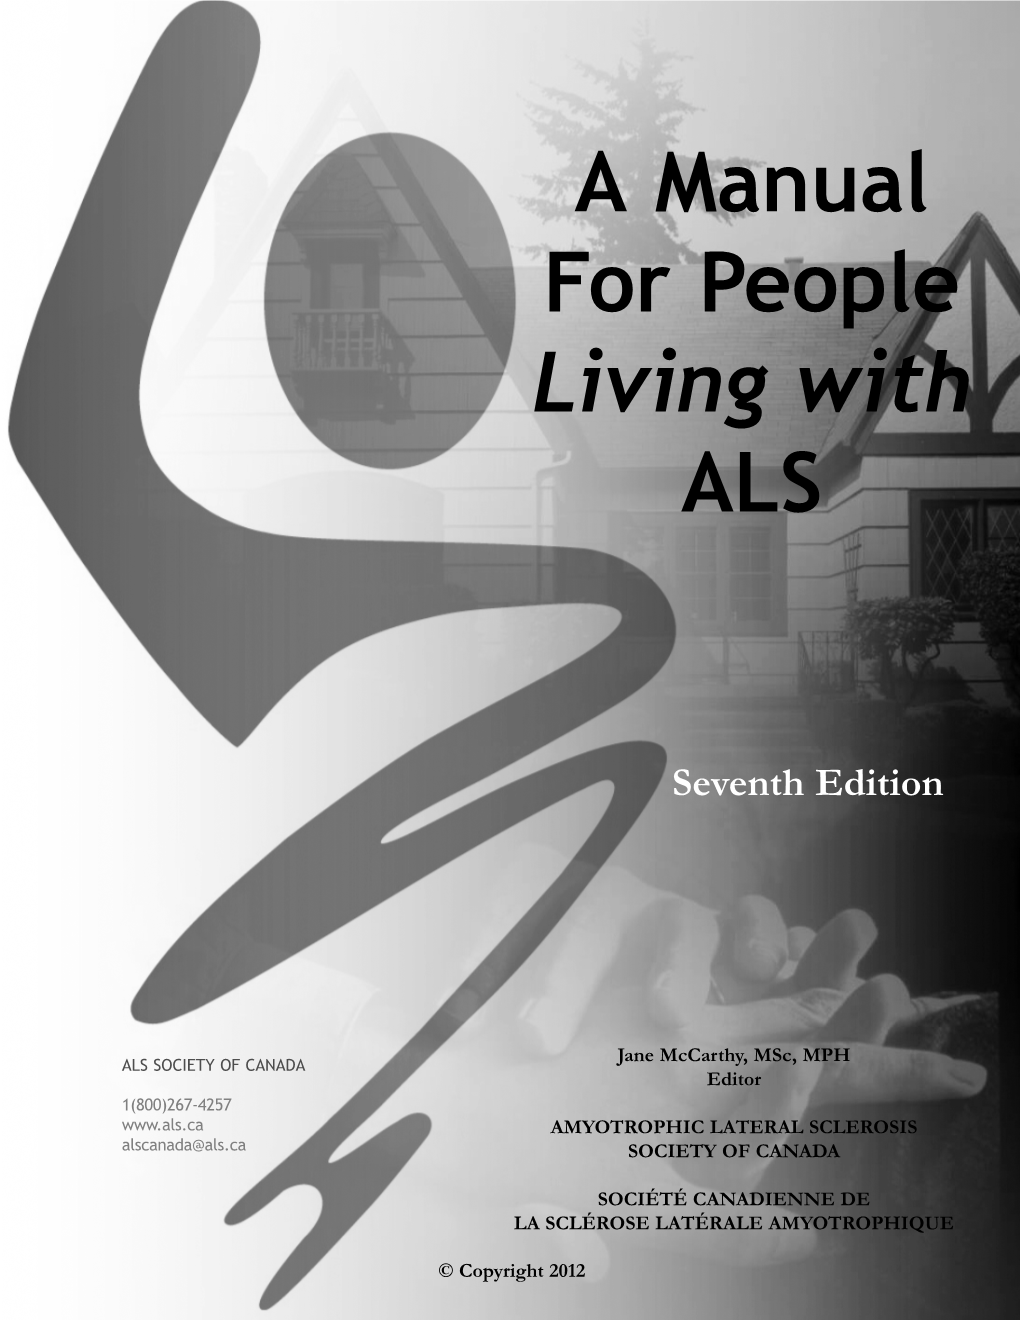 A Manual for People Living with ALS